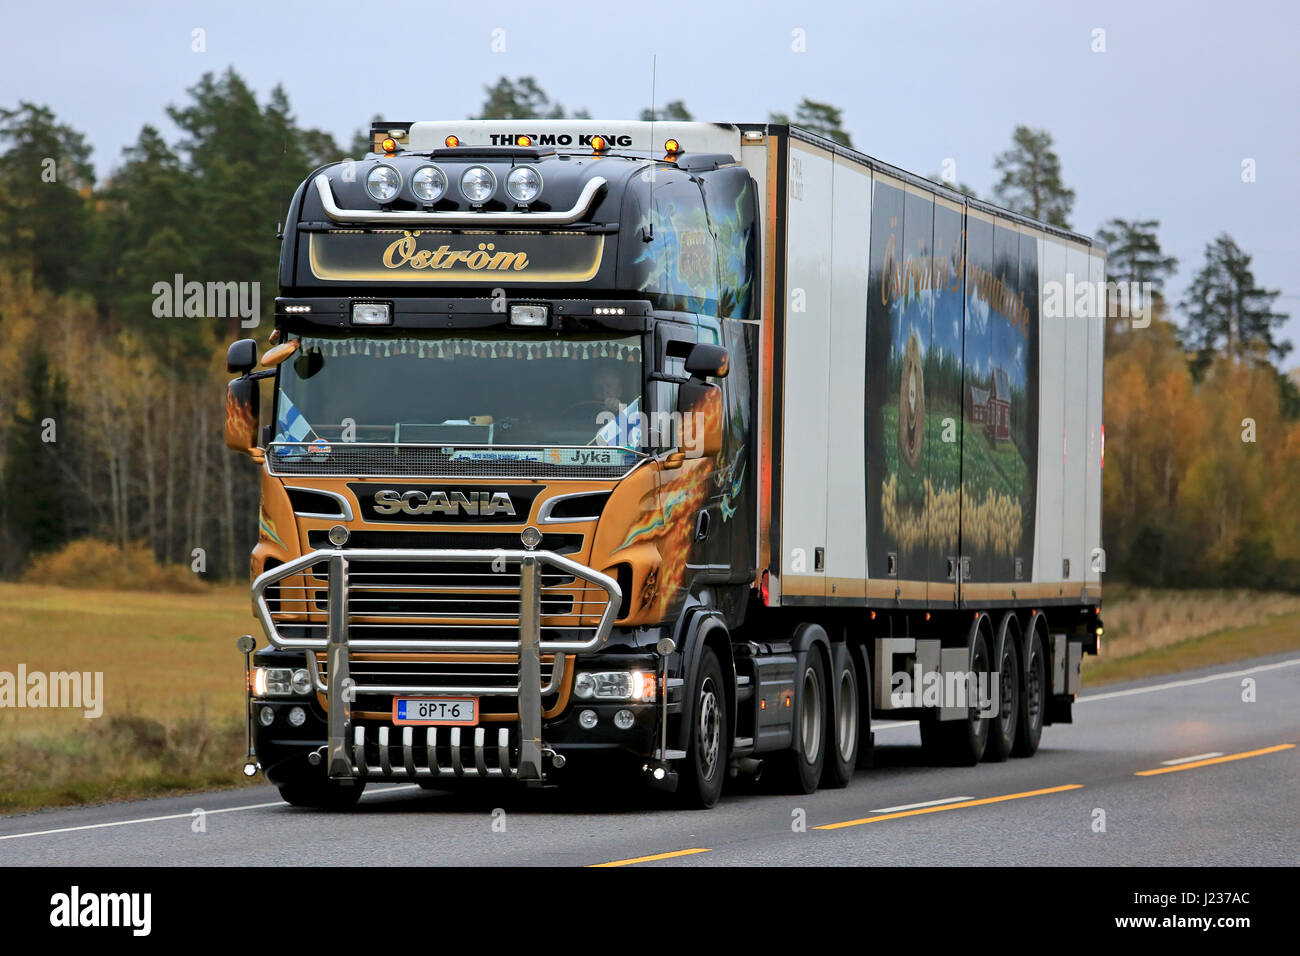 KAARINA, FINLAND - OCTOBER 14, 2016: Customized Scania V8 refrigerator truck of Ostrom Pro Trans for temperature controlled transport on the road in a Stock Photo